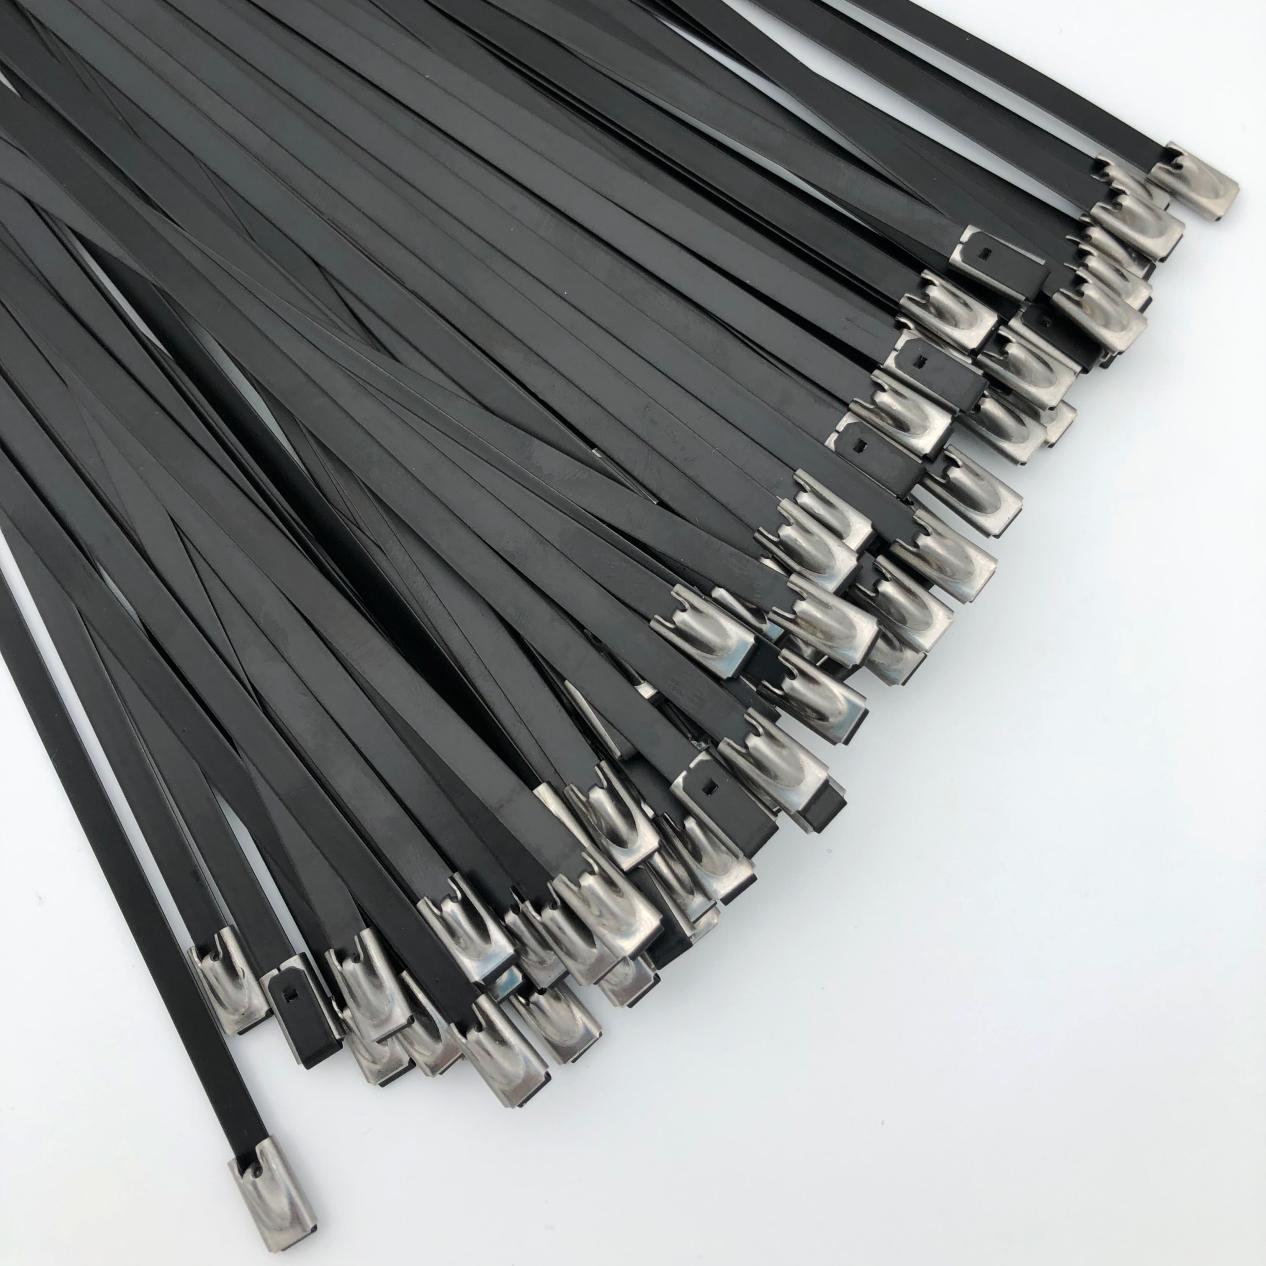 High-Quality Black Stainless Steel Cable Ties for Diverse Industrial Applications